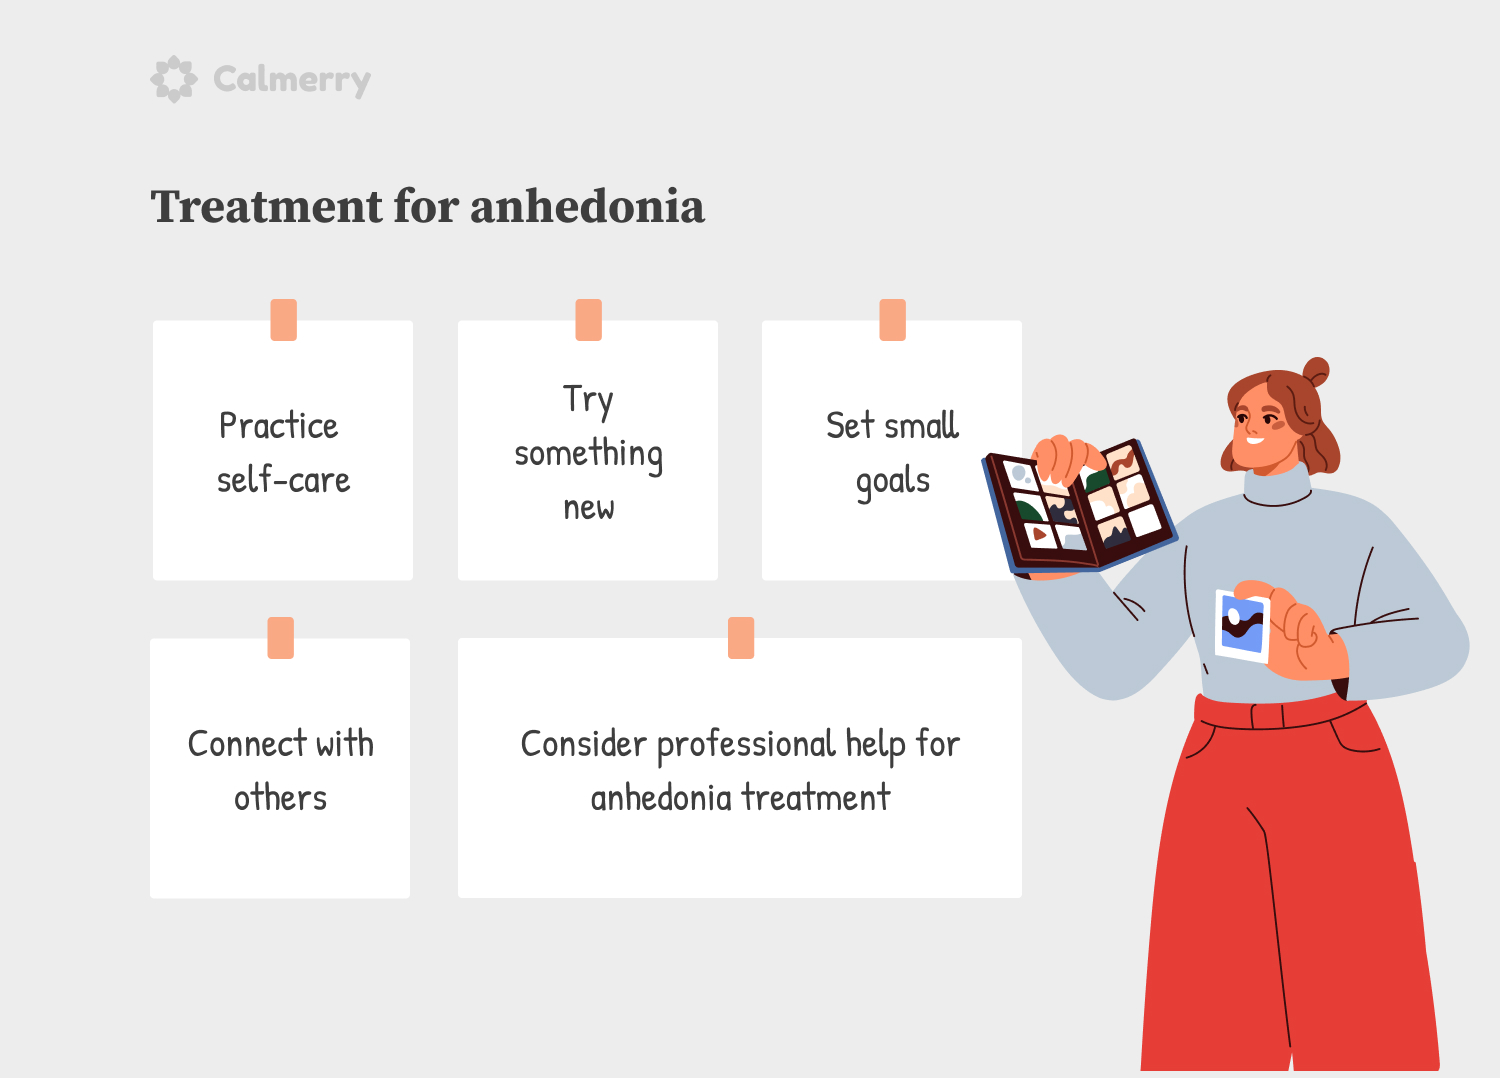 Treatment for anhedonia